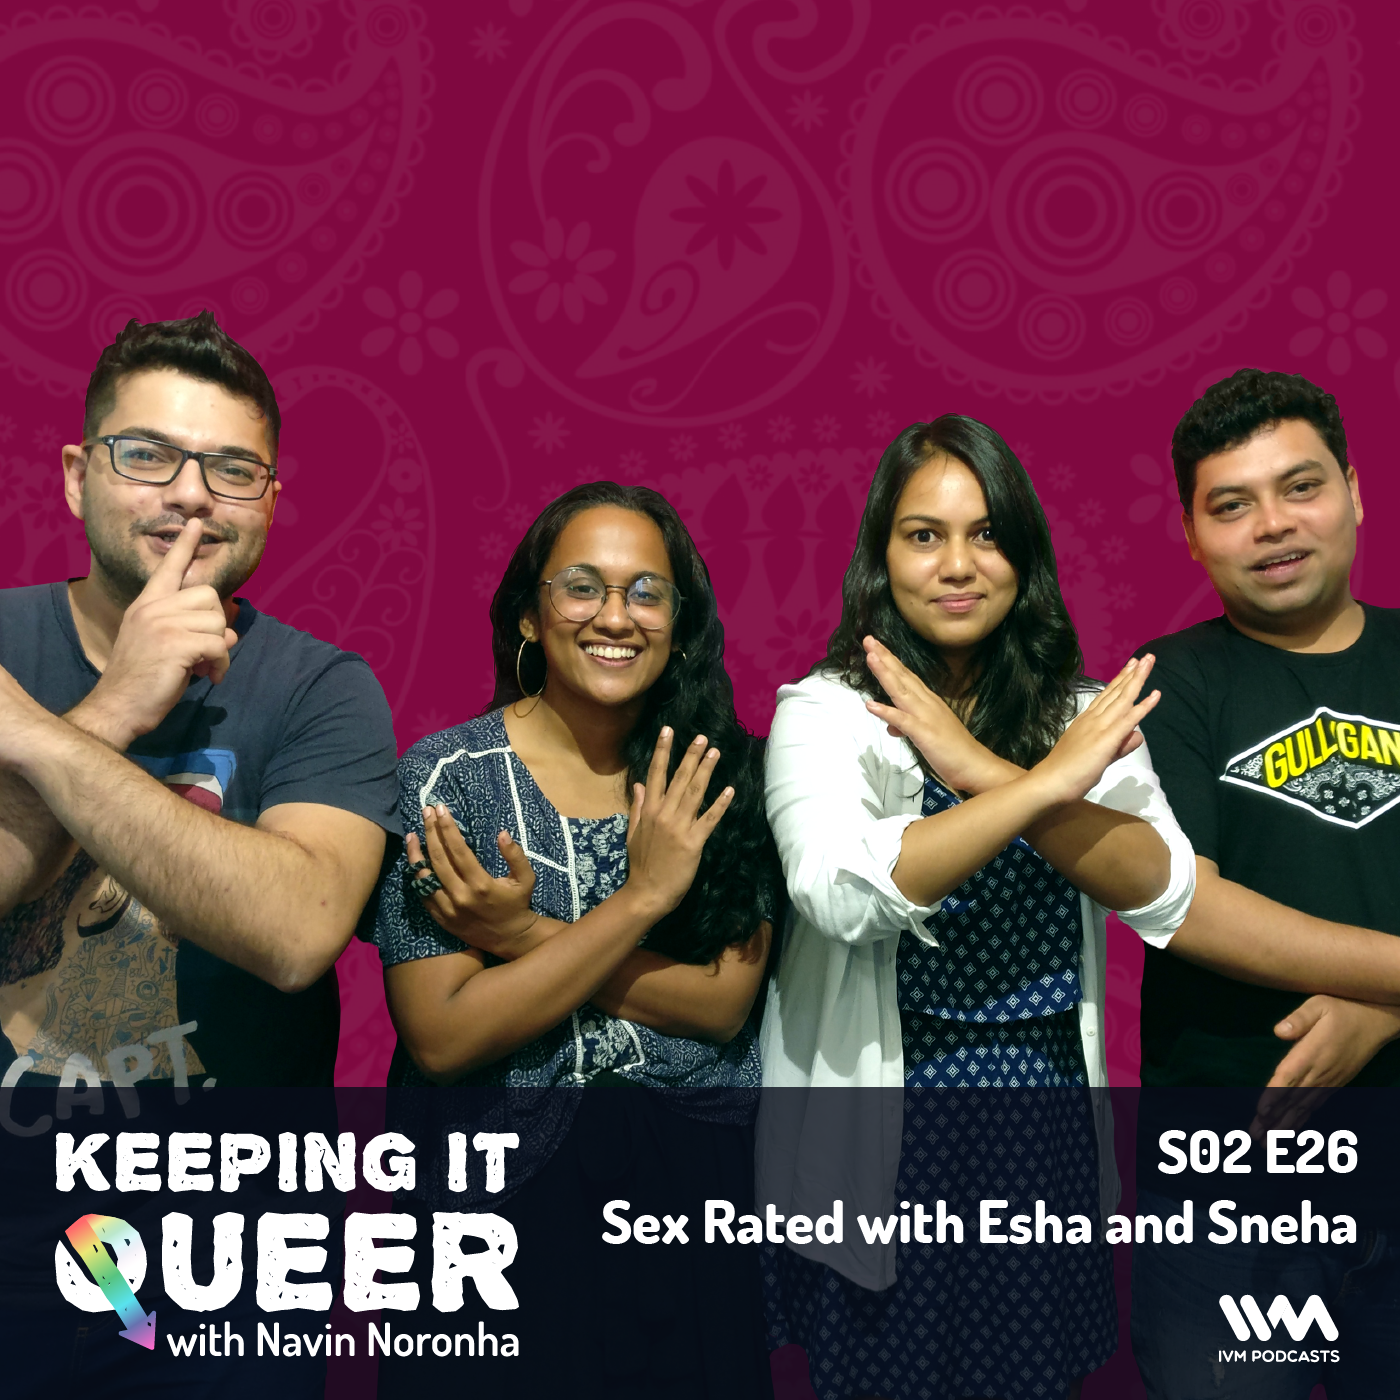 S02 E26: Sex Rated with Esha and Sneha